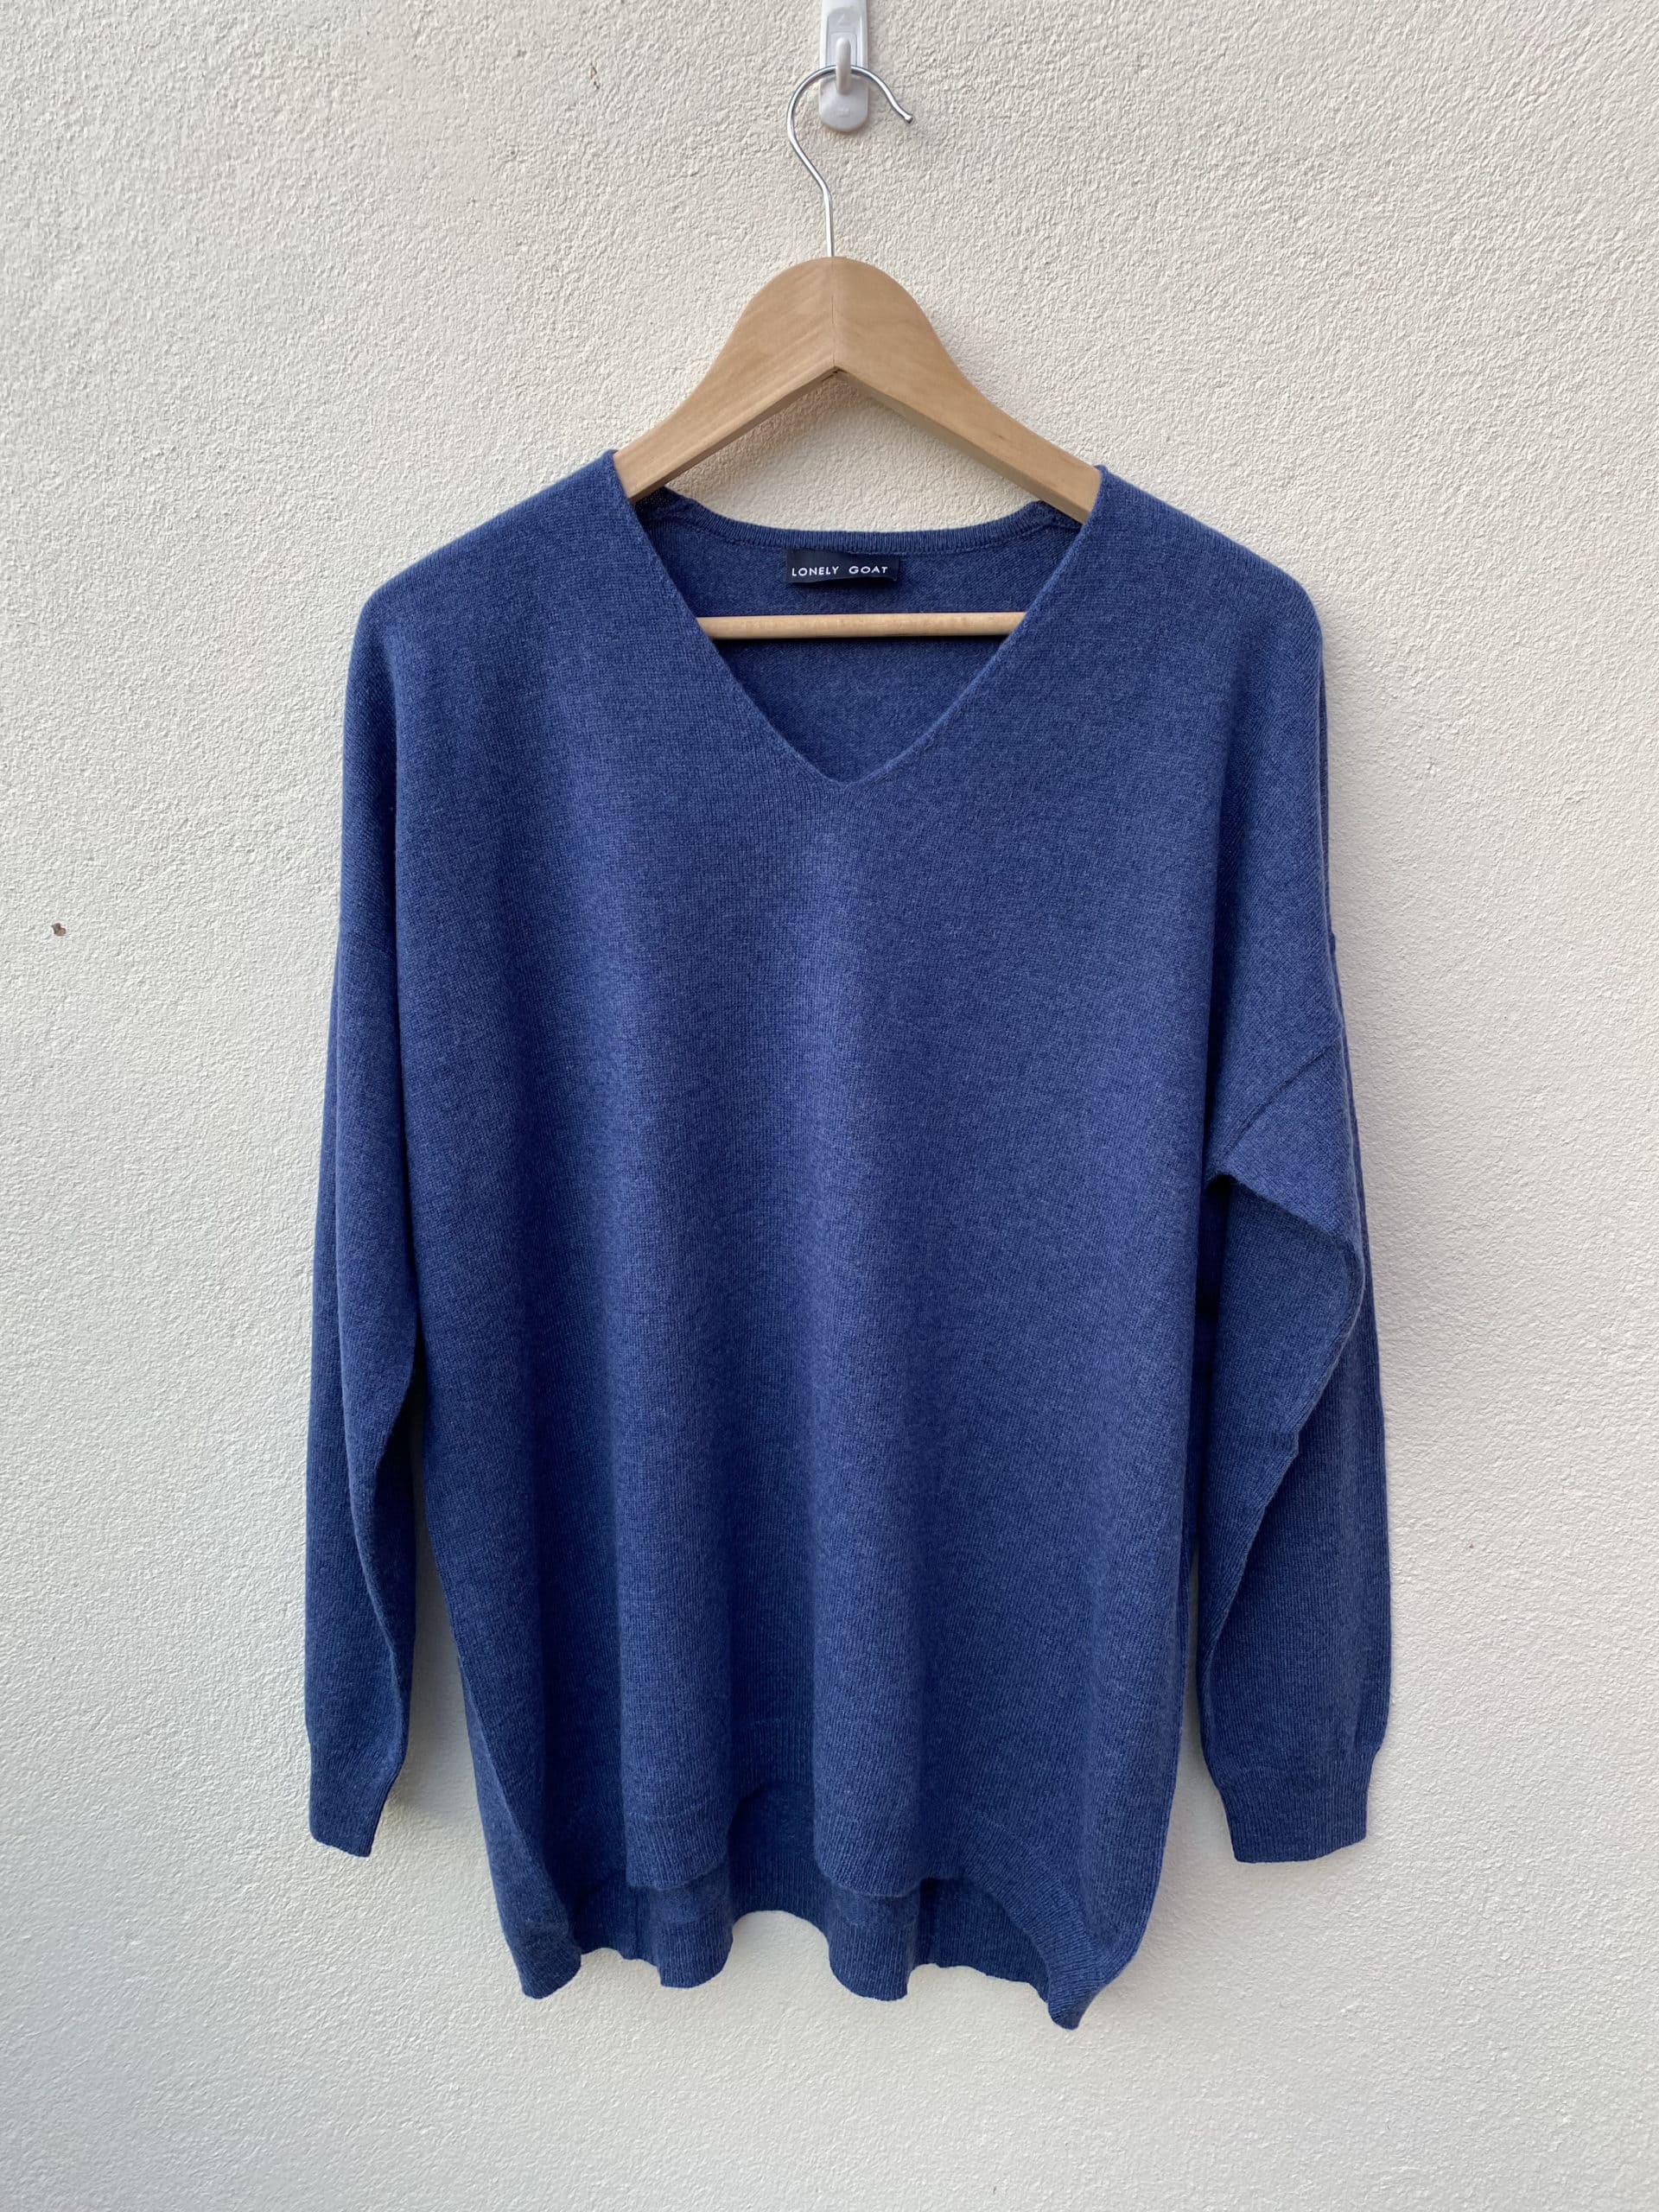 Women's Cashmere V-Neck Sweater - Lonely Goat Cashmere